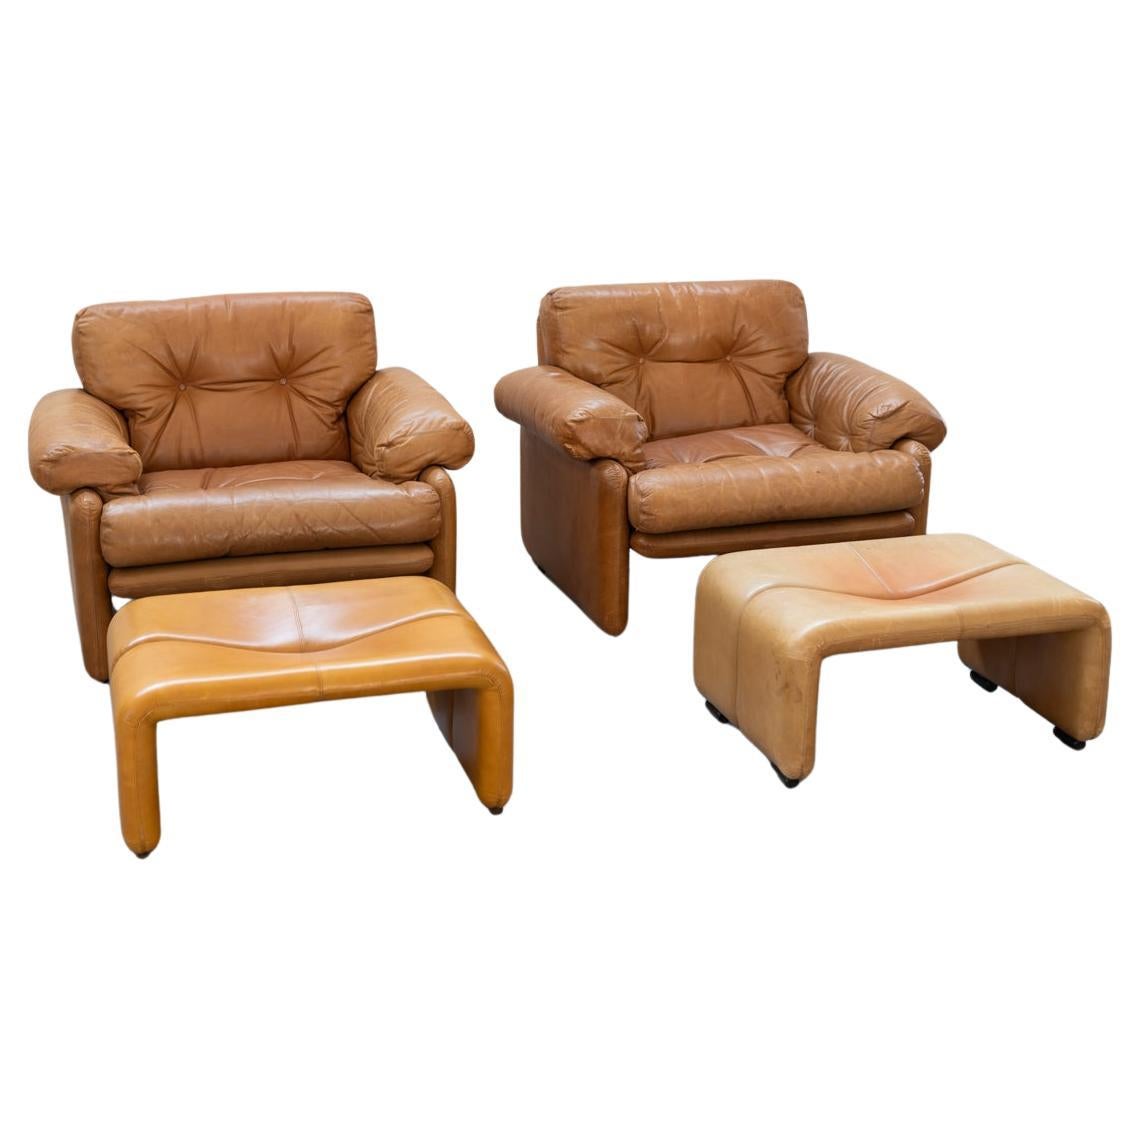 Pair of armchairs with pouf in cognac color model "Coronado" by Afra&Tobia scarpa